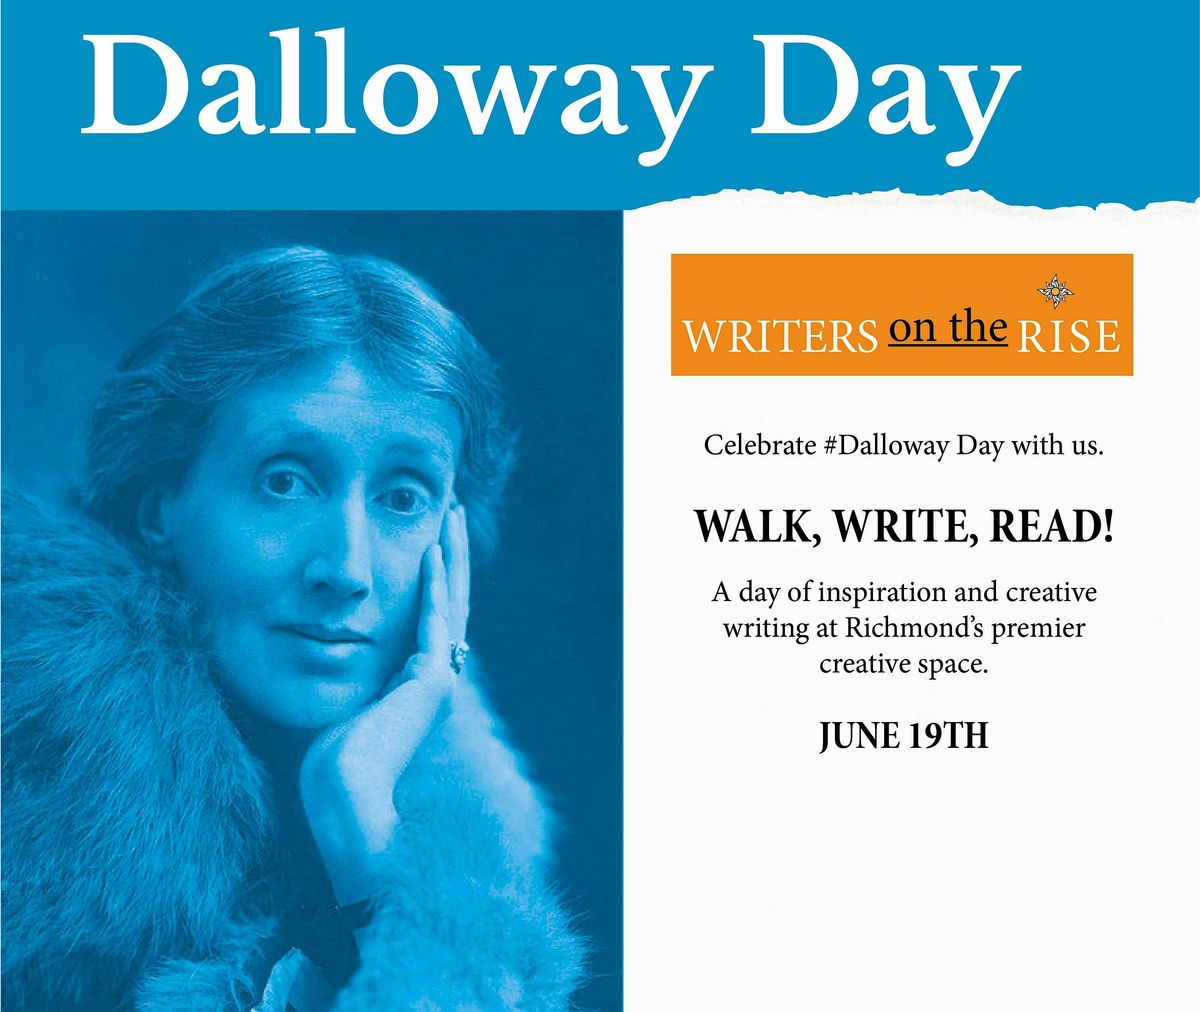 #Dalloway Day of creative writing and inspiration